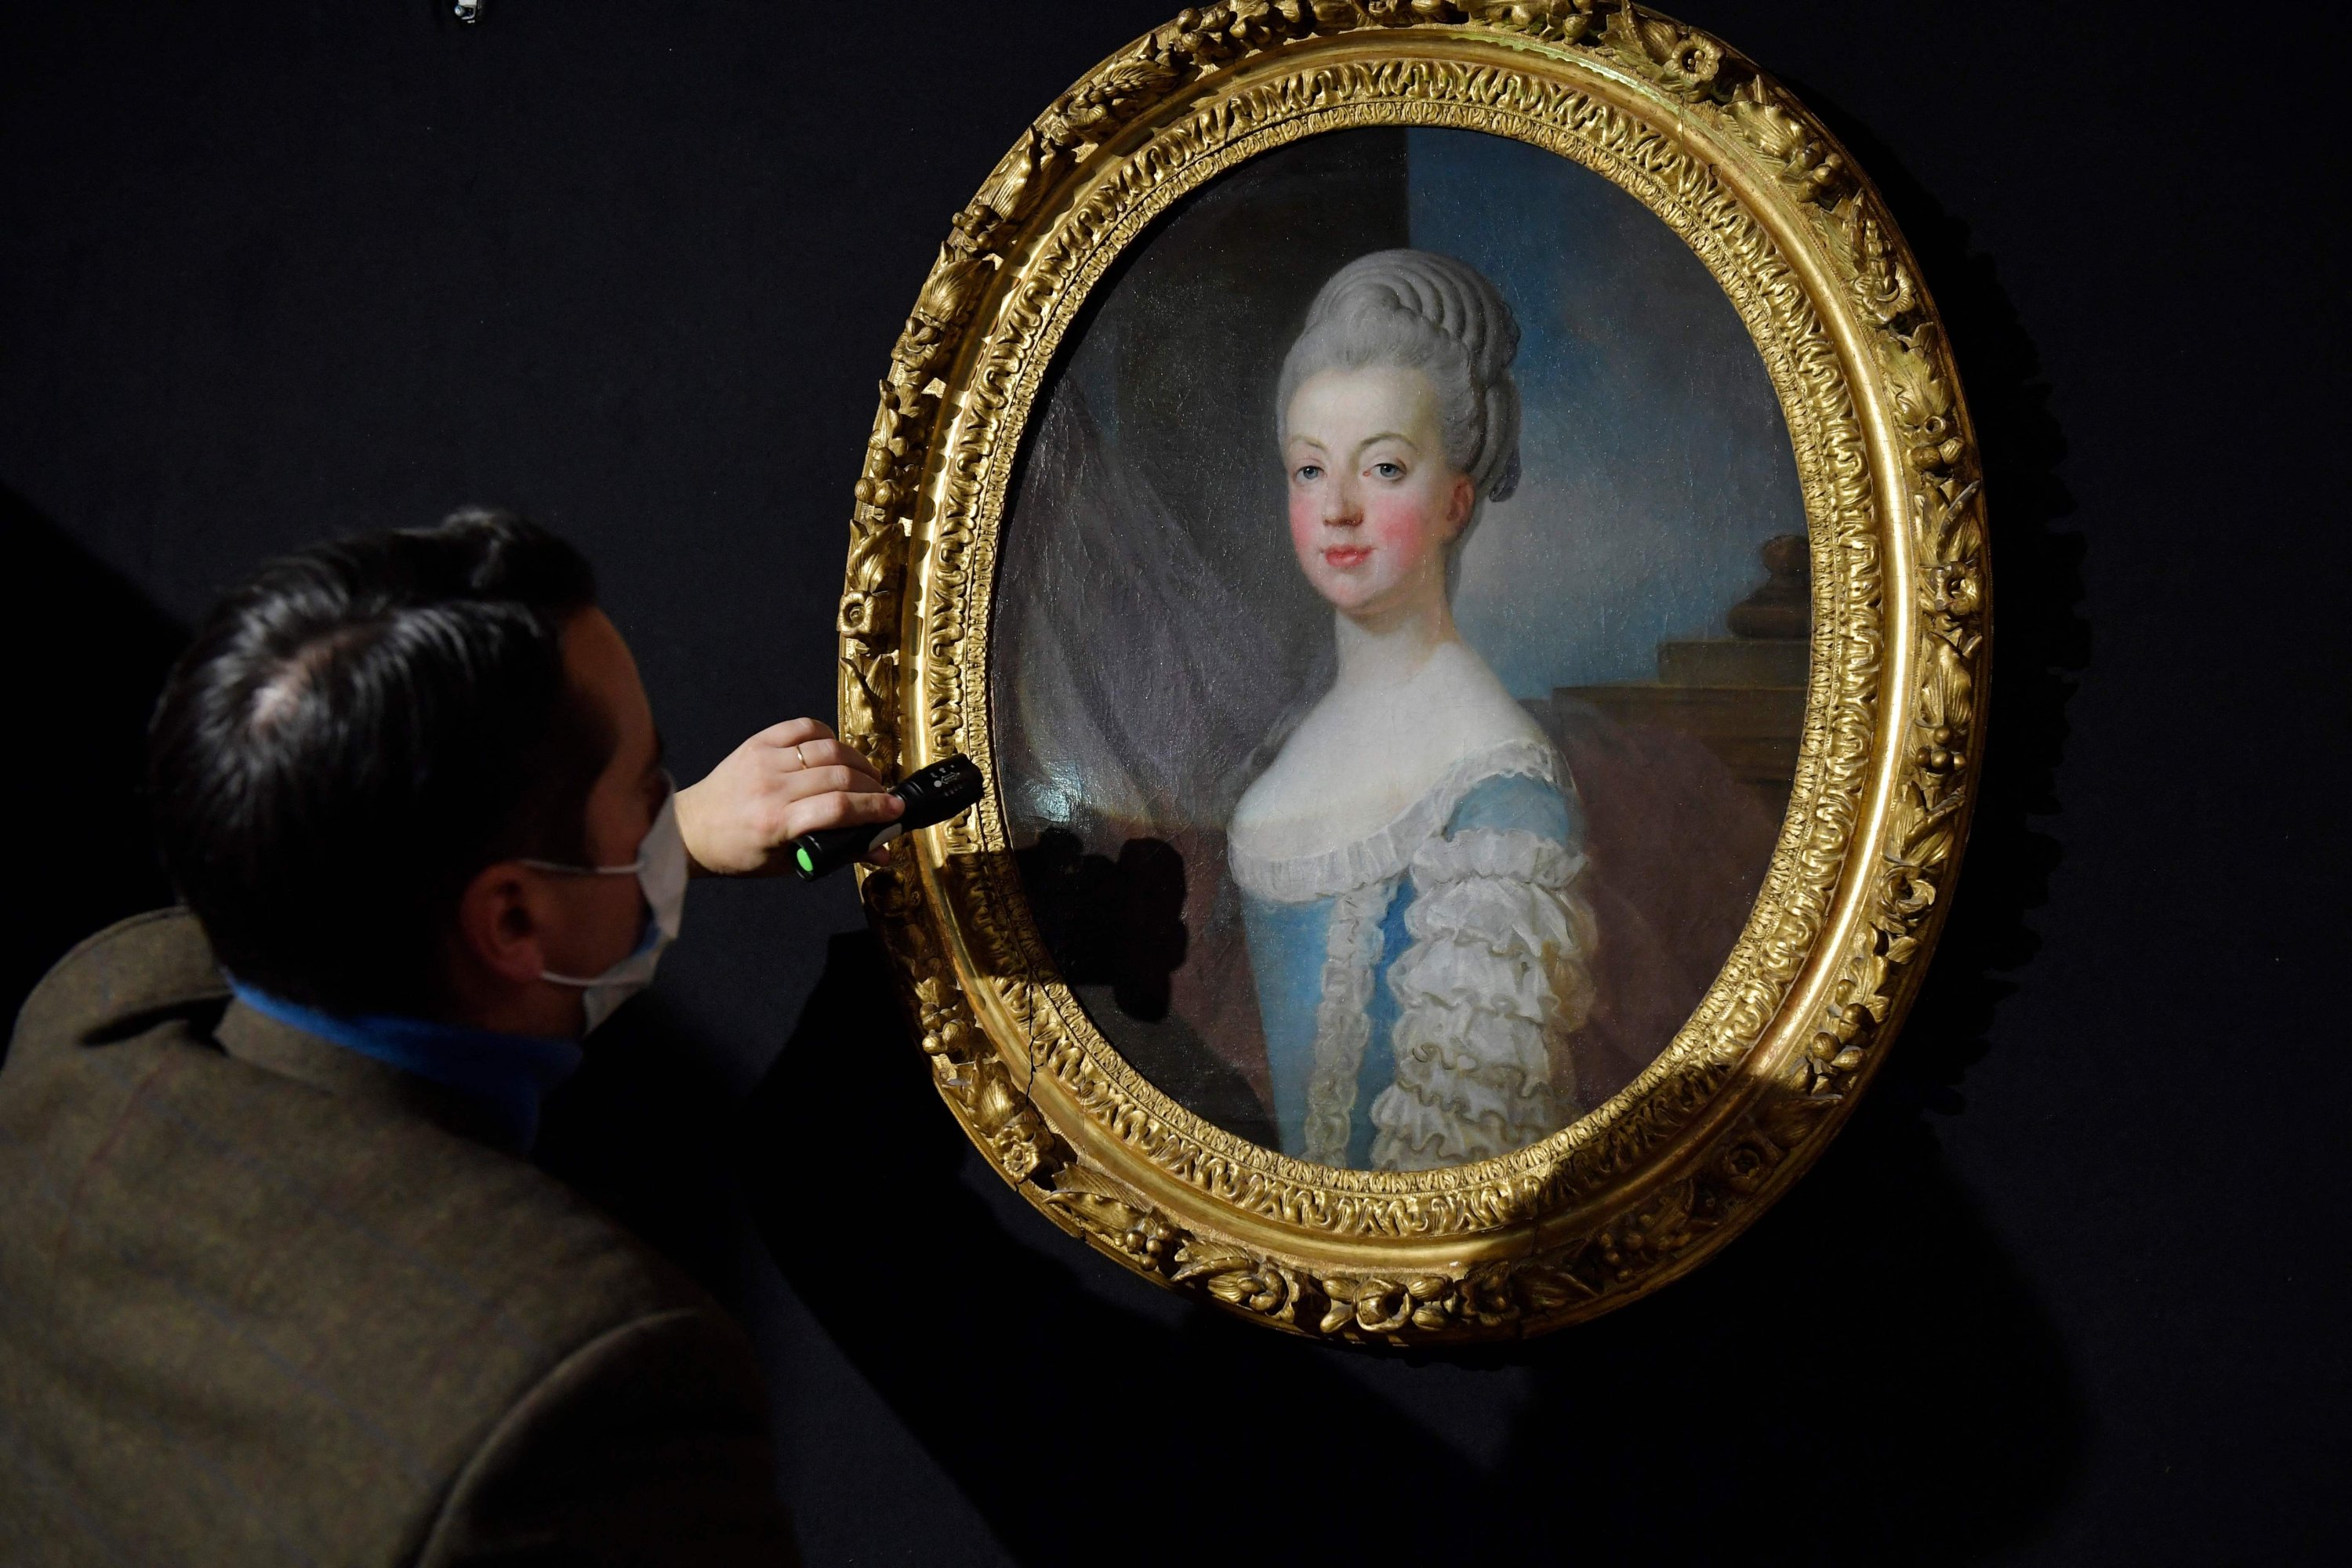 A man examines a painting by Joseph Siffried Duplessis & Atelier Carpentras, before its auction at Auguttes auction house in Neuilly sur Seine near Paris, France, Nov. 23, 2021. (AFP Photo)